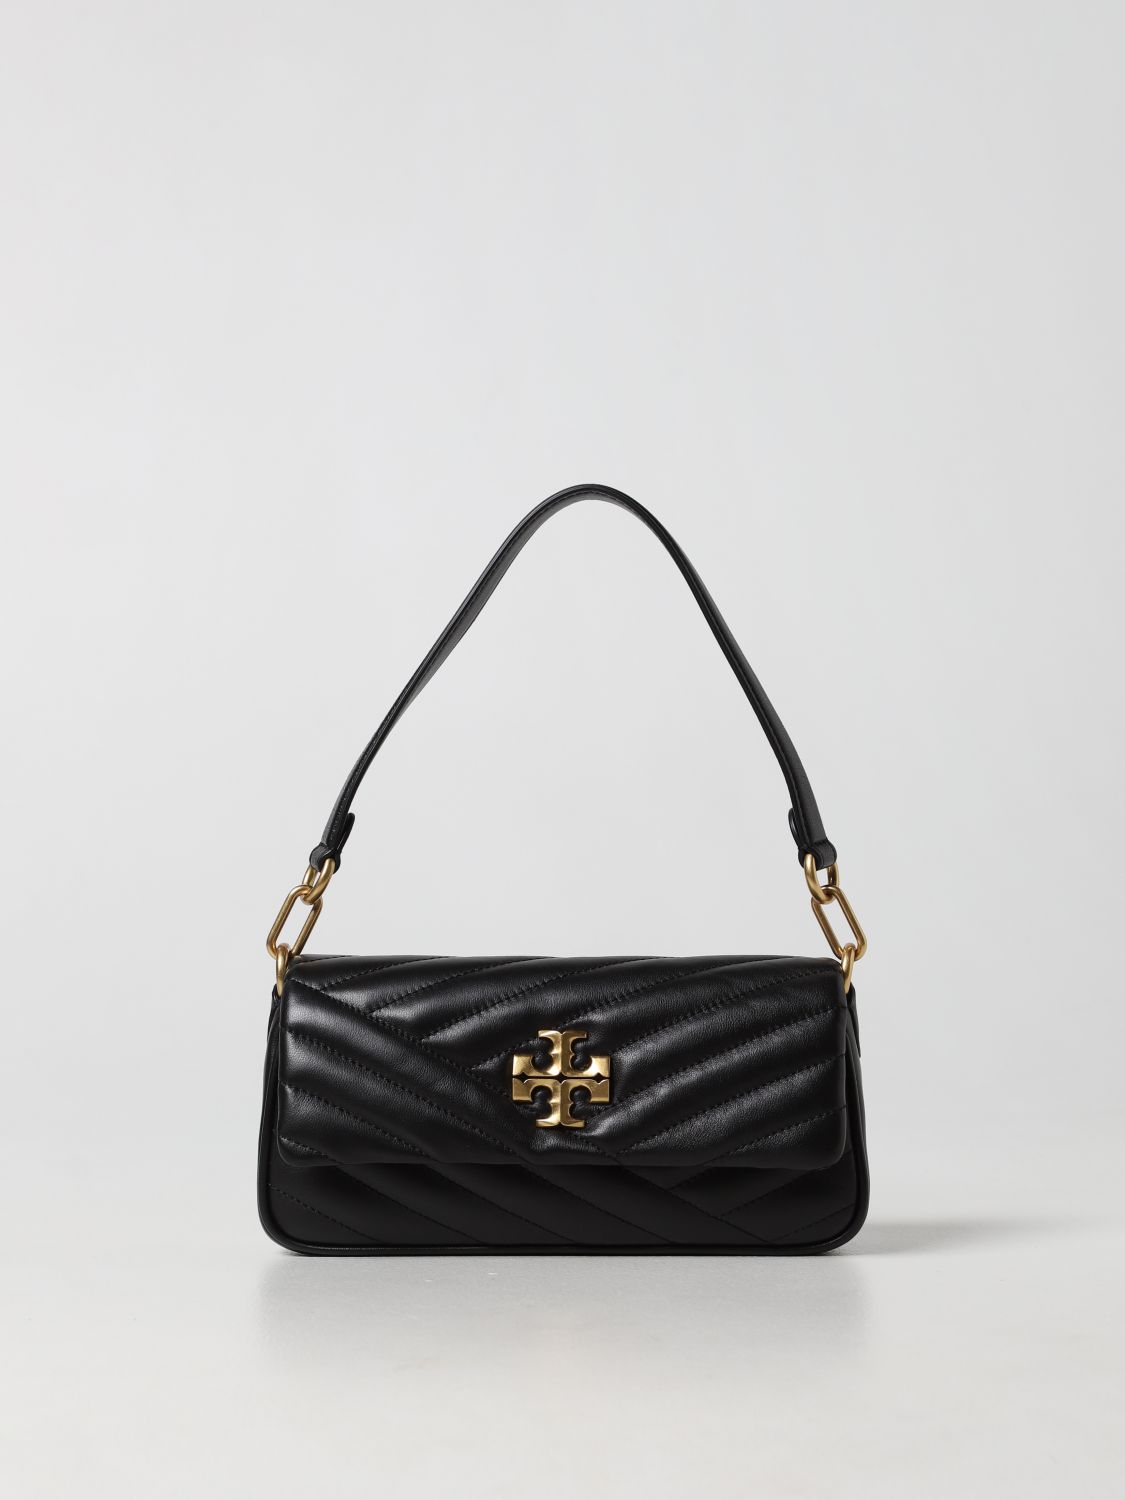 Tory Burch Outlet: Kira bag in quilted leather - Black | Tory Burch  shoulder bag 90456 online on 